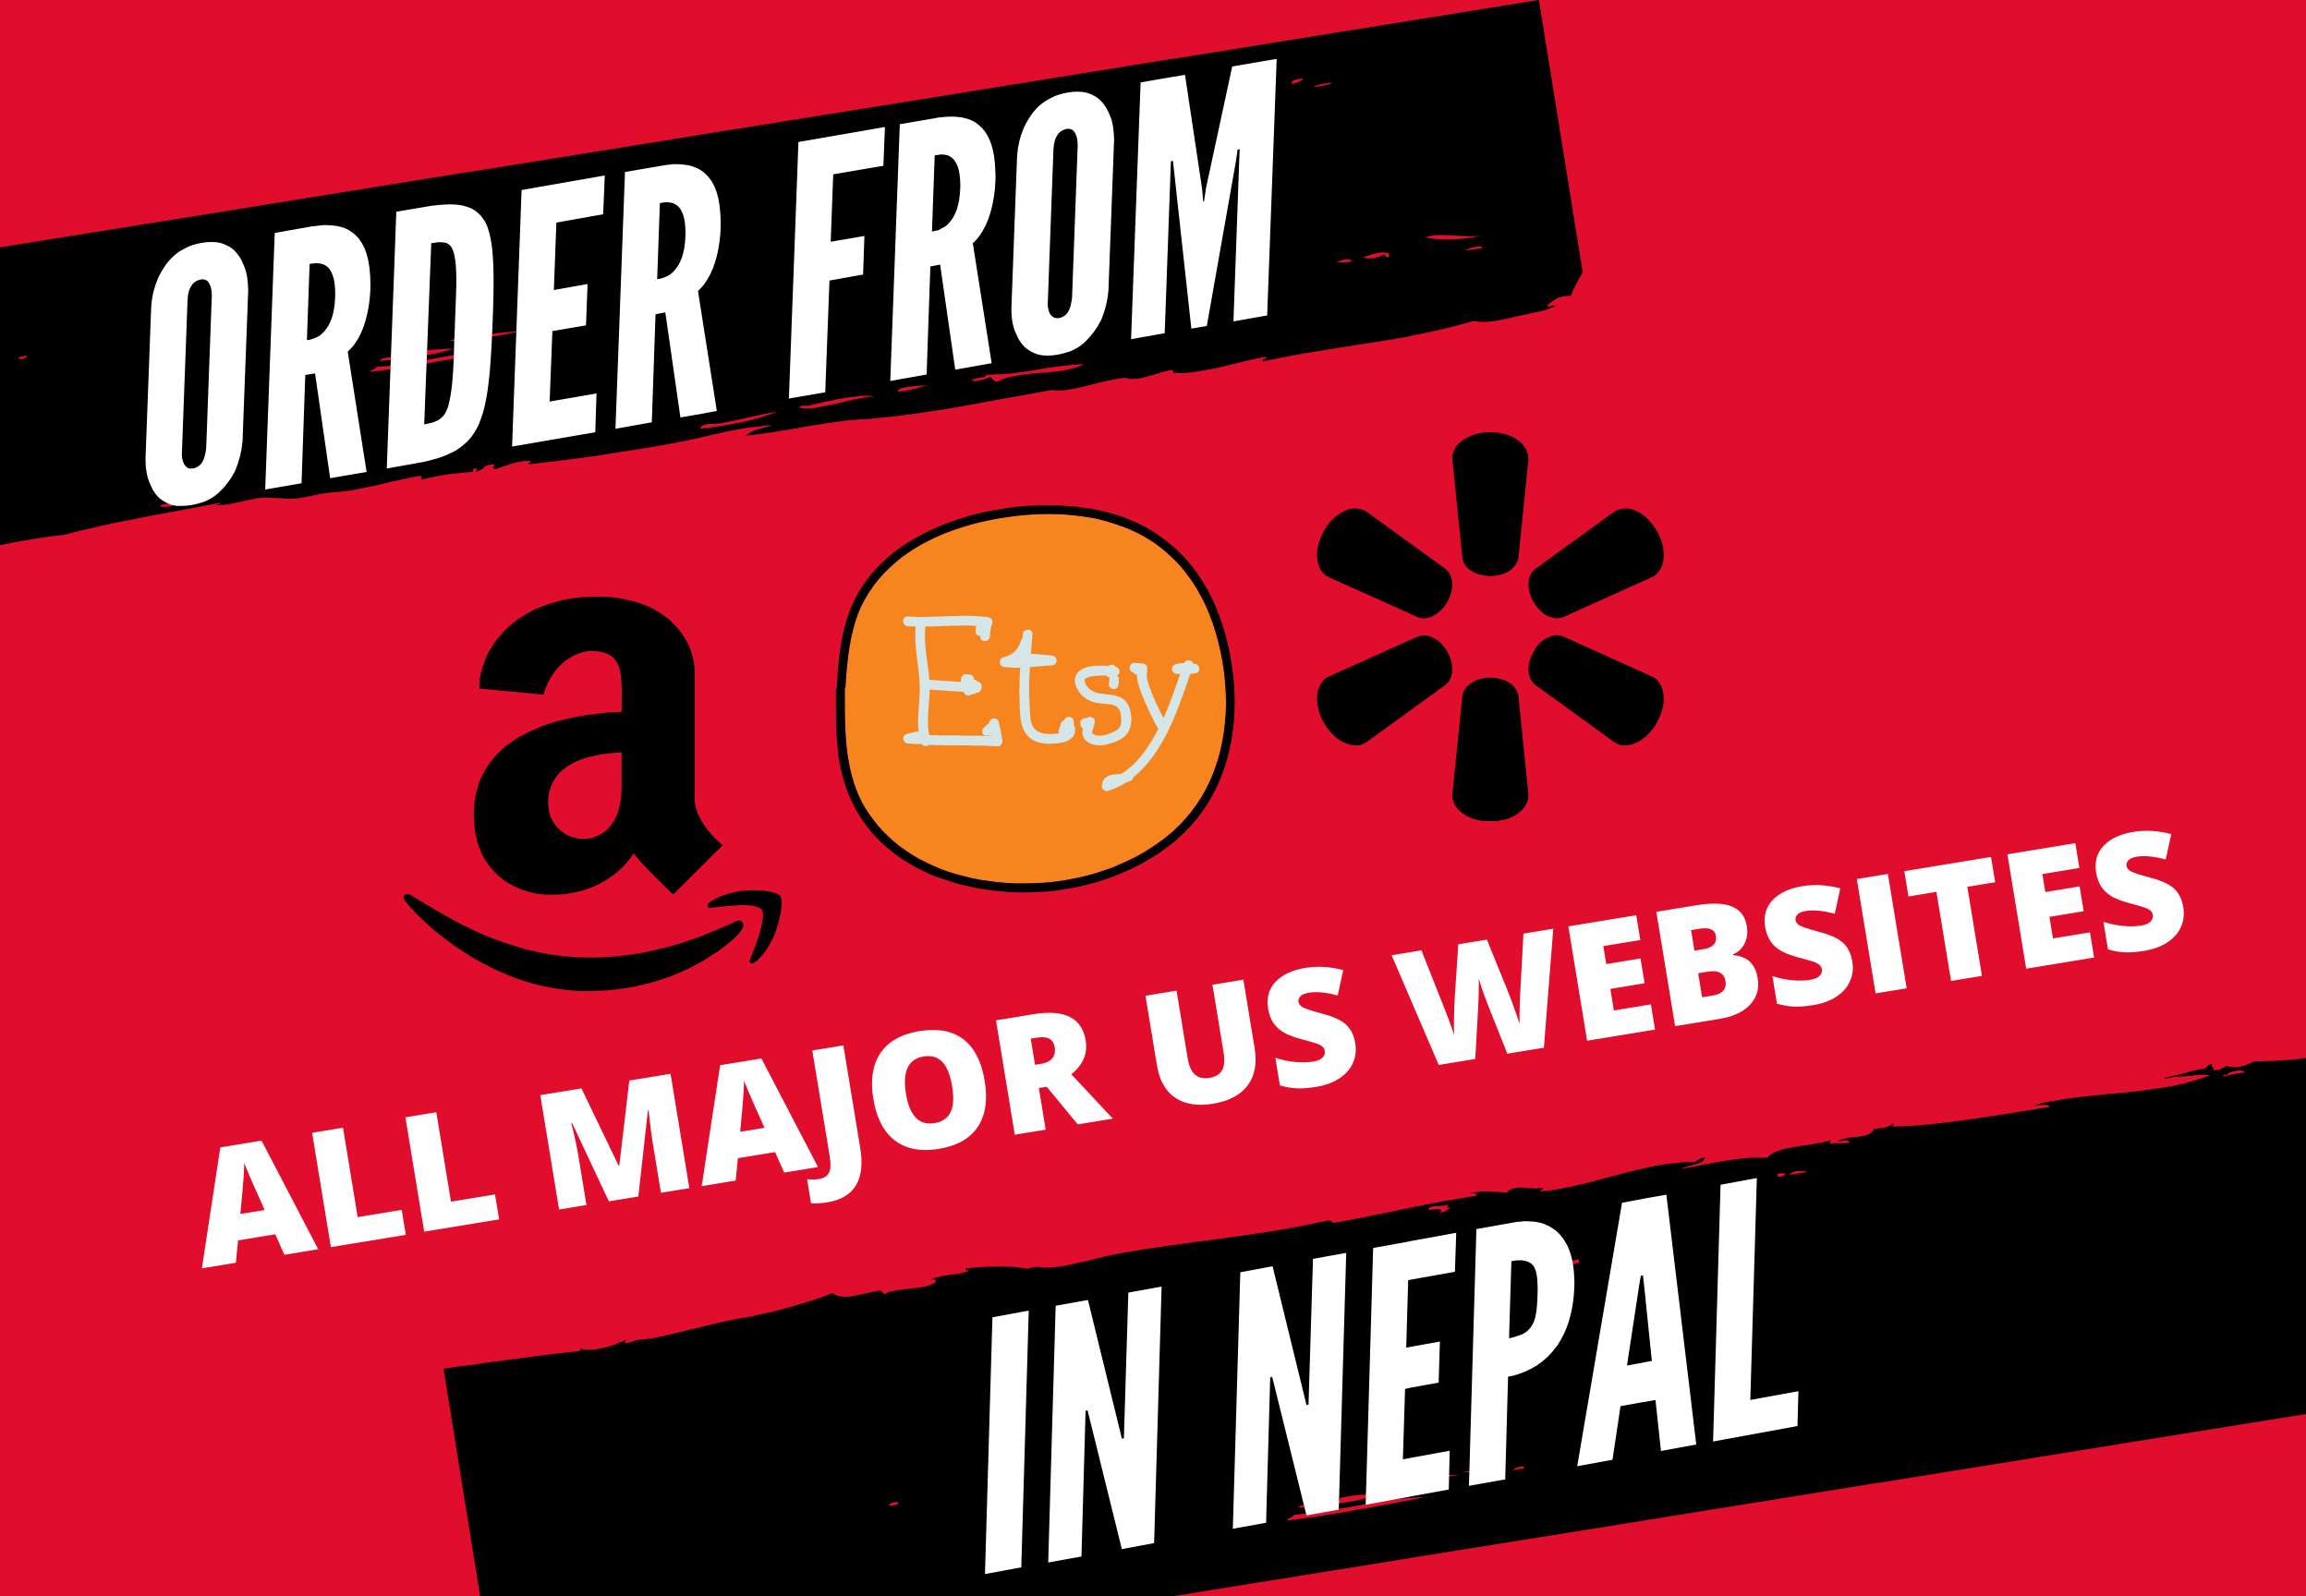 How To Order From Amazon In Nepal? - A Helpful Illustrative Guide